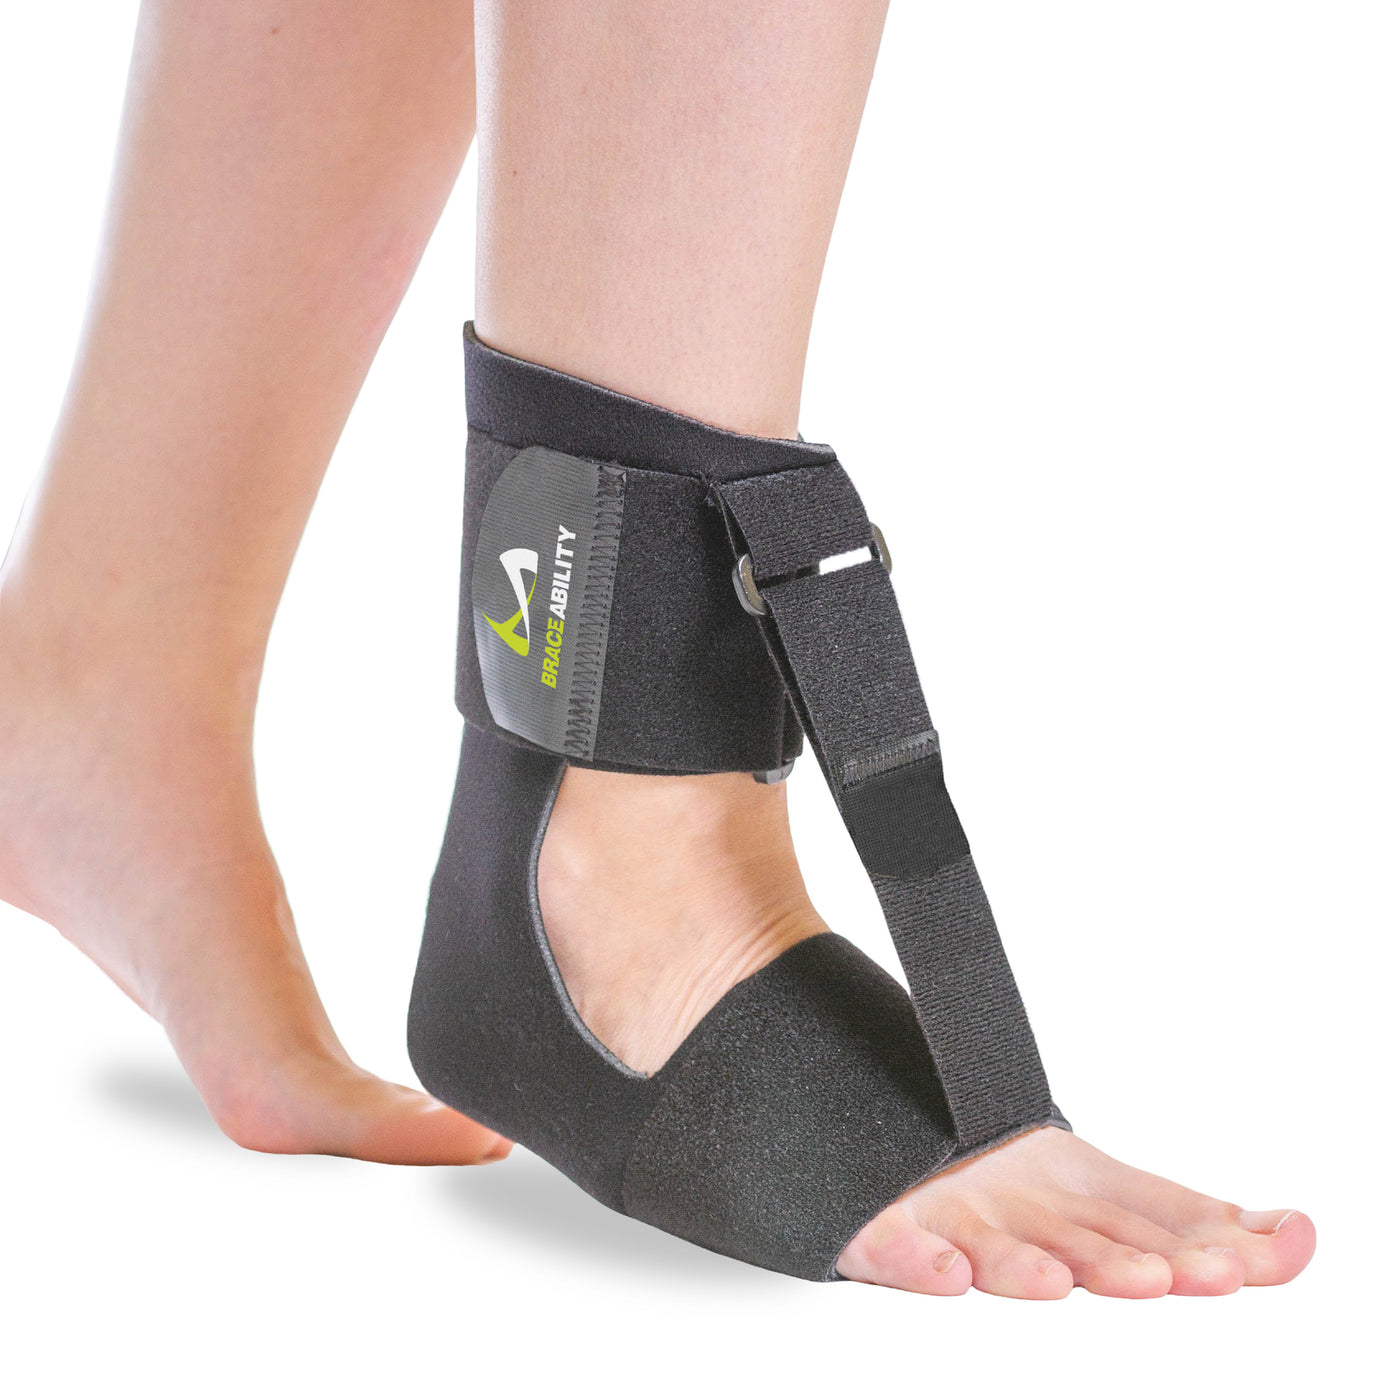 orthotic braces for foot